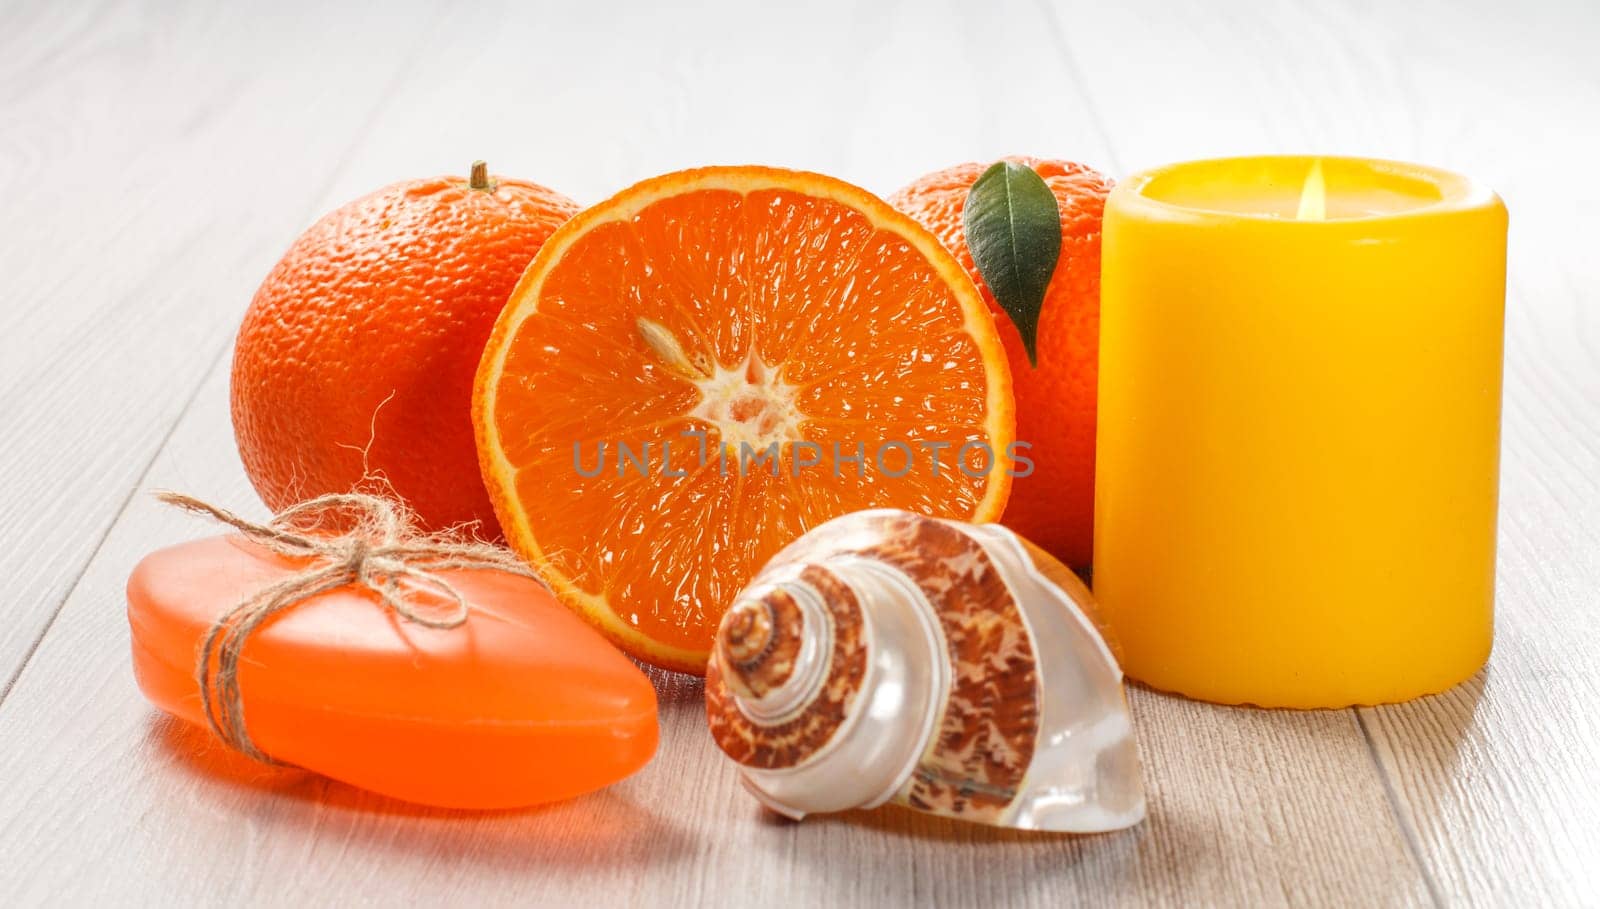 Cut orange with two whole oranges, soap, sea shell and burning candle on wooden desk. Spa products and accessories.